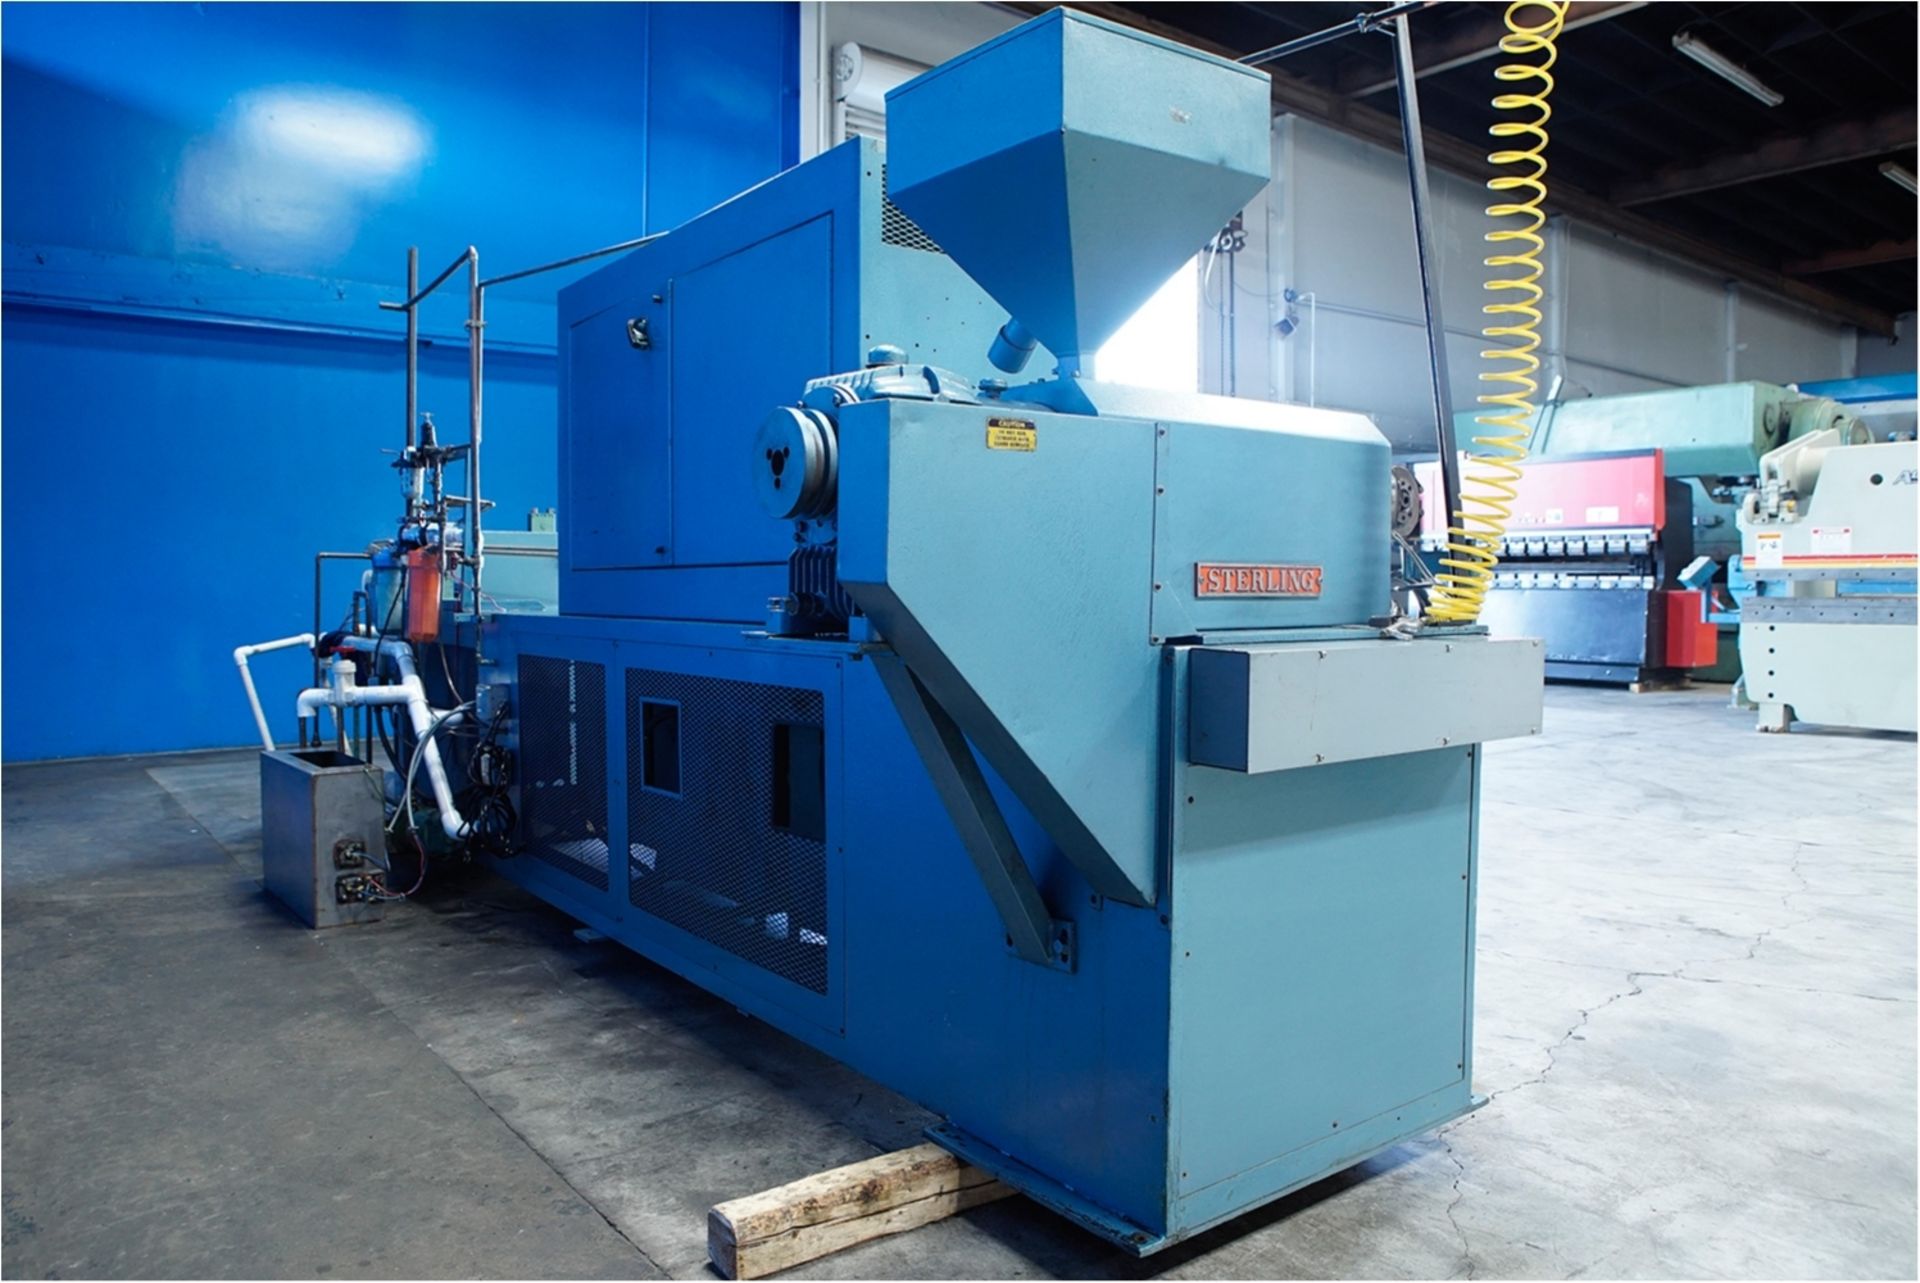 1 1/4''Davis Electric Sterling Wire Coating Extrusion Line, Model: Mini Extrvsion, Serial #: 12561R, - Image 3 of 10